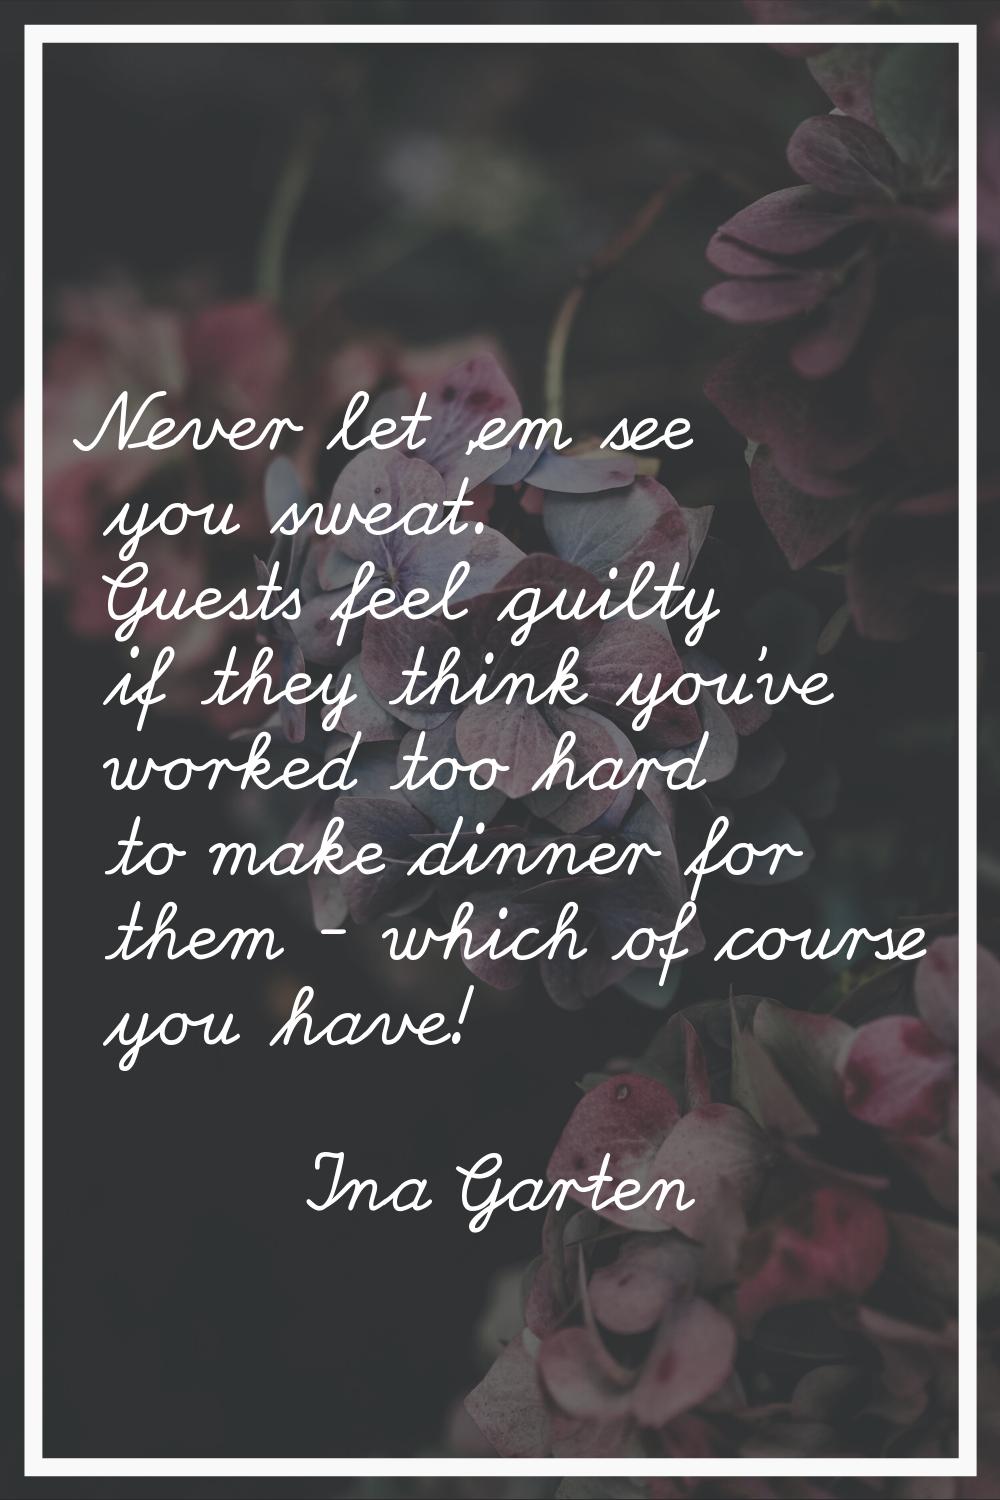 Never let 'em see you sweat. Guests feel guilty if they think you've worked too hard to make dinner